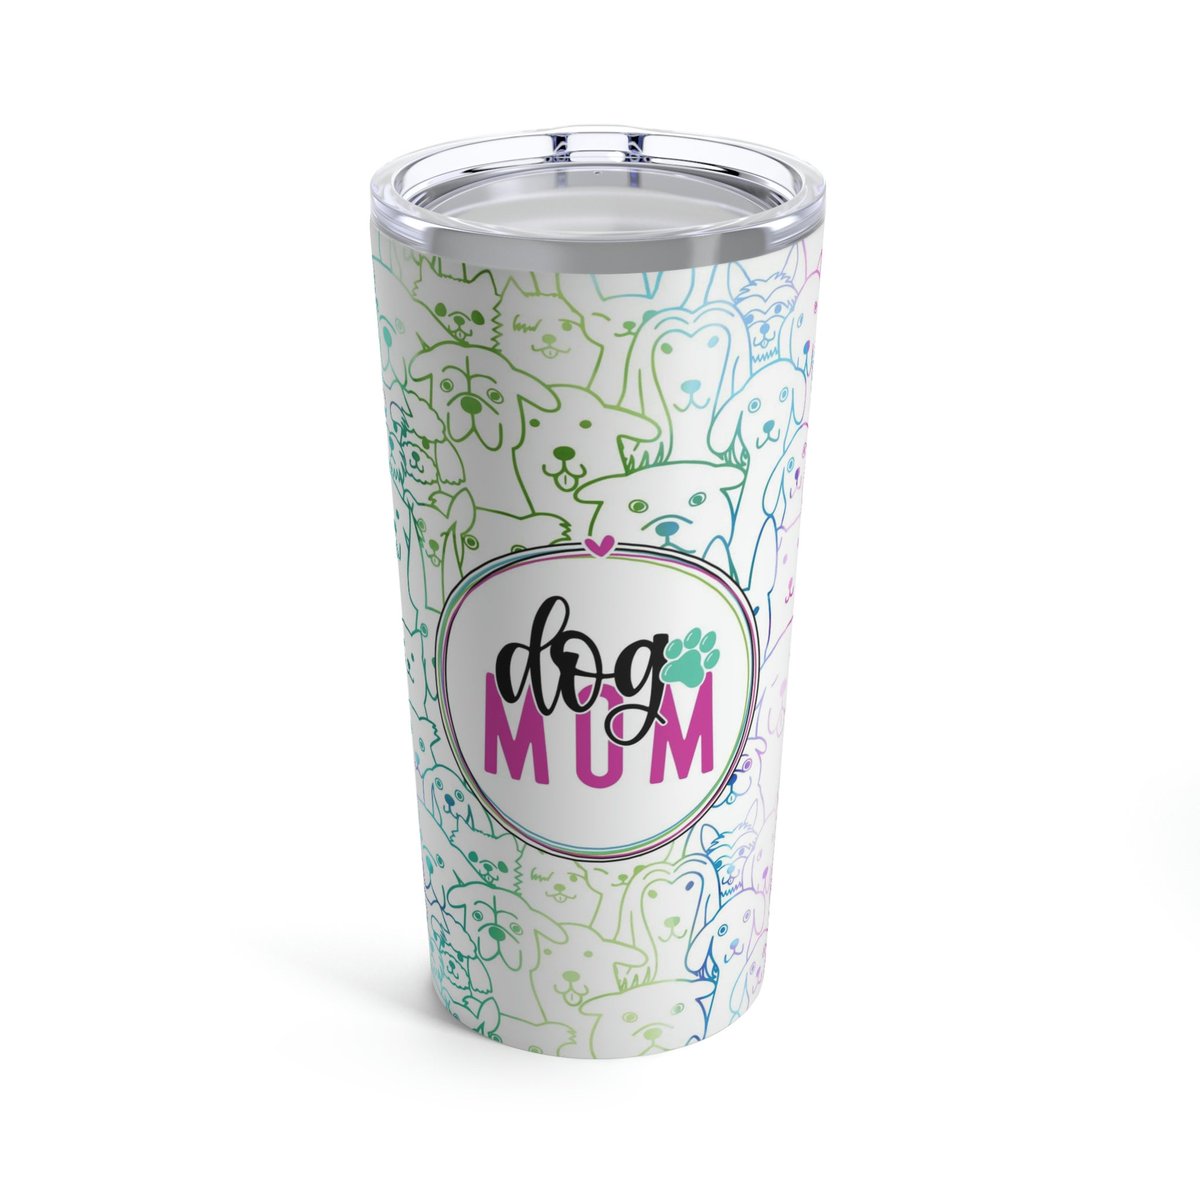 Excited to share the latest addition to my #etsy shop: Dog Mom Colorful Tumbler 20oz, Pet Lover Travel Cup, Dog Pet Owner Gift, Hot or Cold Coffee Cup, Mothers Day Gift etsy.me/3ZknHVx #white #metal #dogmom #dogcoffemug #dogcoffecup #travelmug #dogtumbler #dogo